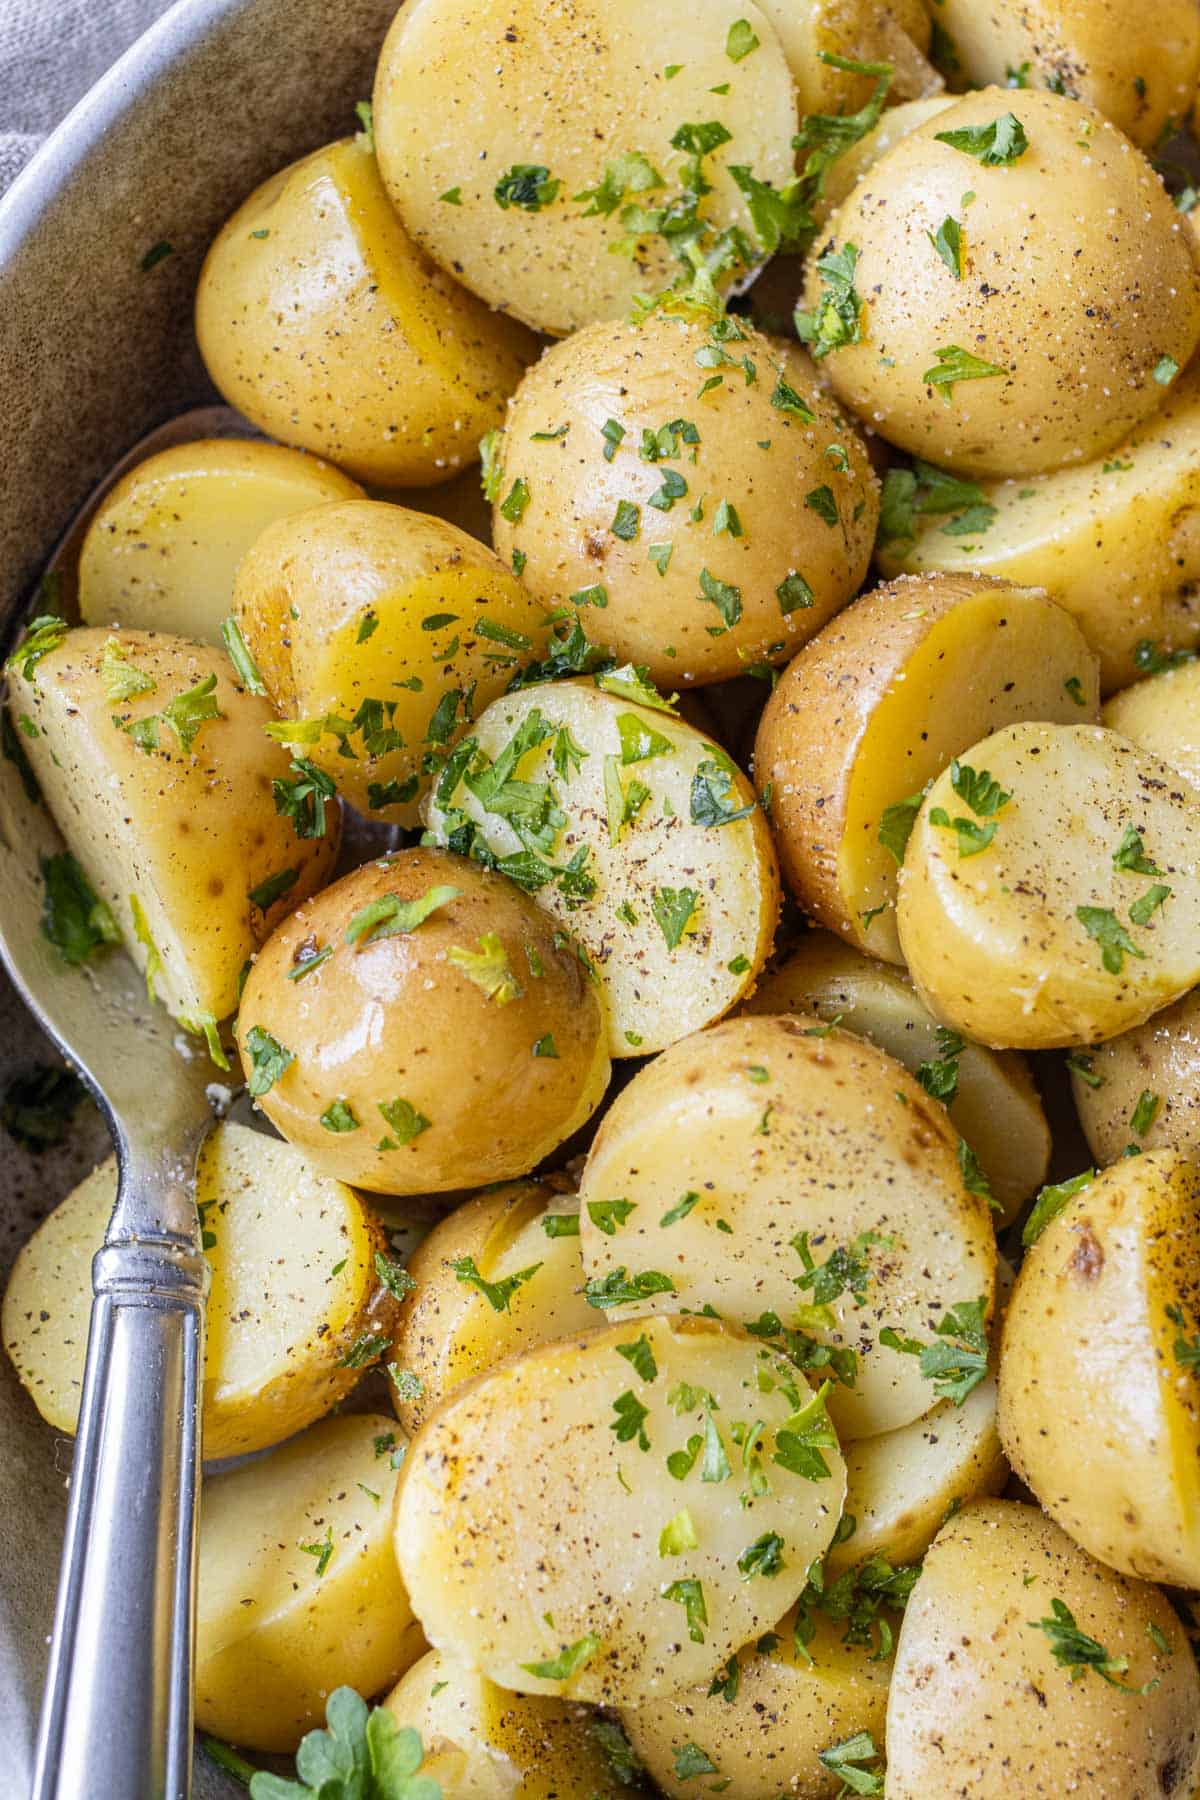 A spoon in a bowl with perfectly boiled potatoes